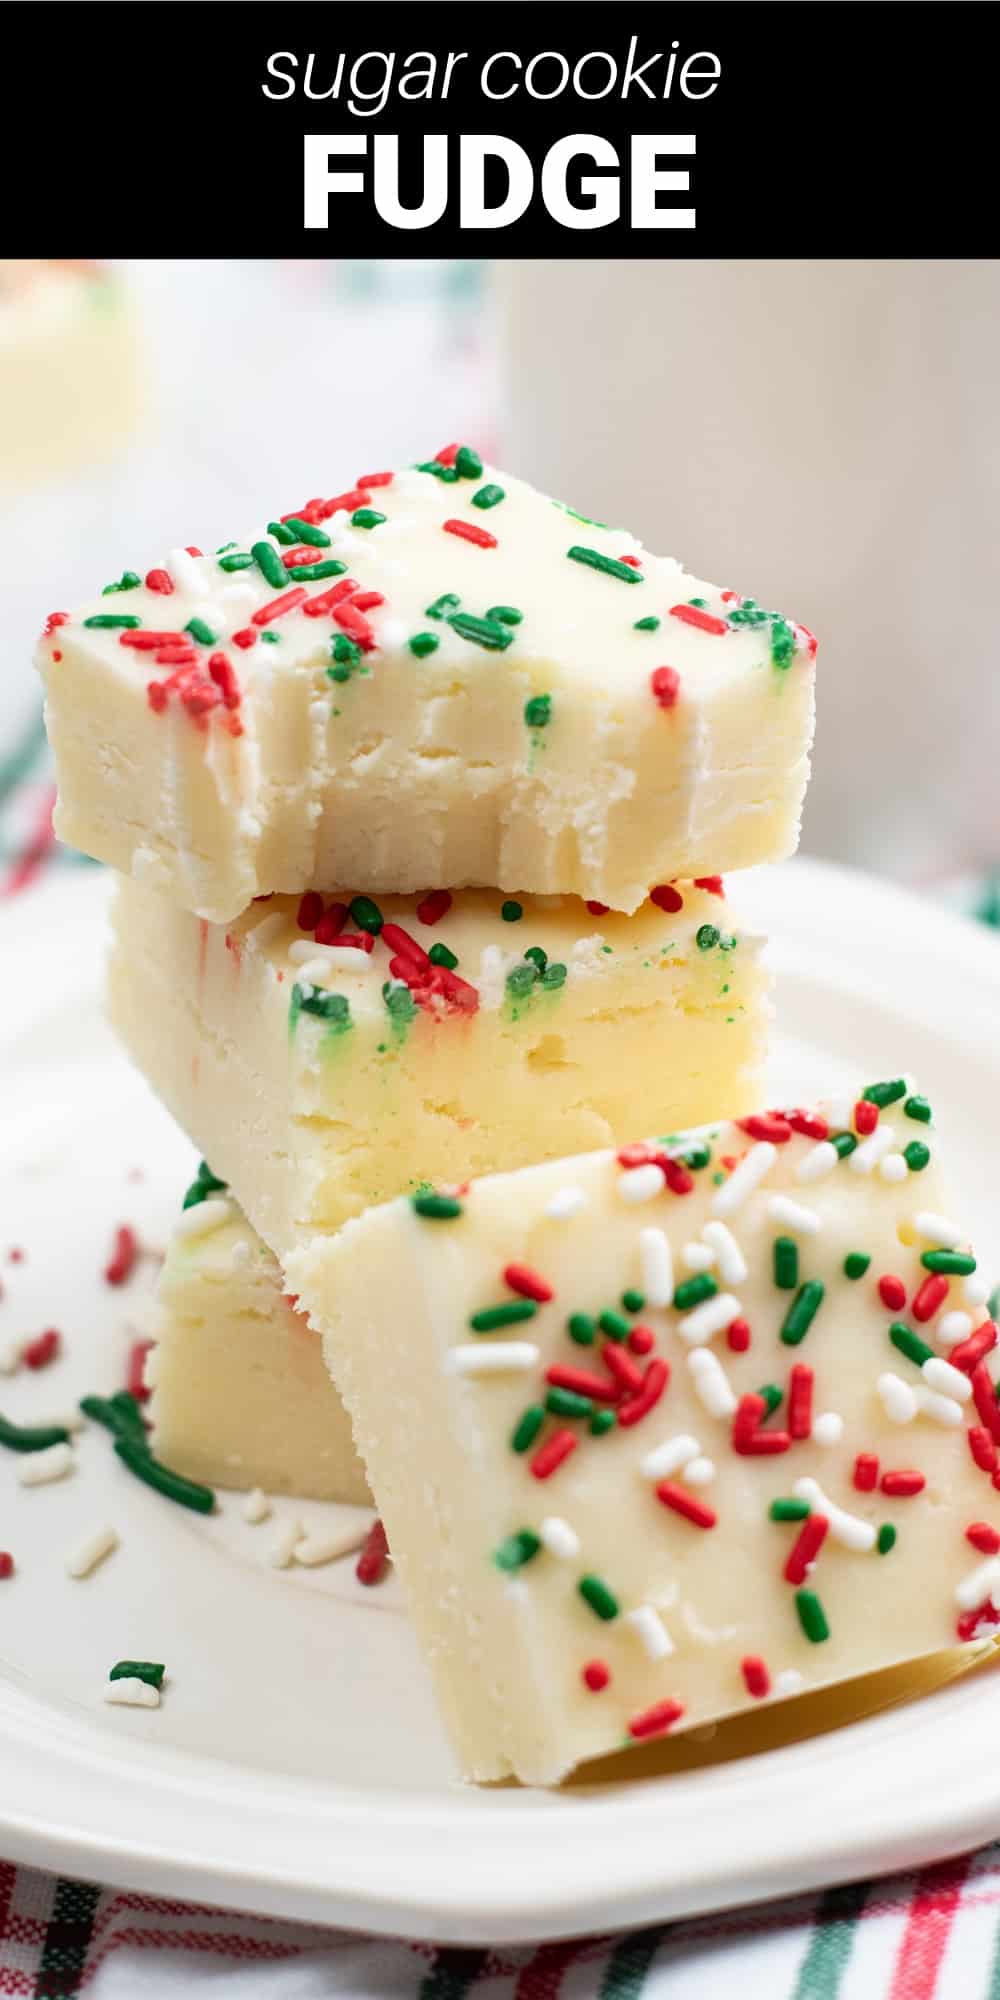 This velvety smooth Sugar Cookie Fudge is a rich and decadent white chocolate fudge with delicious sugar cookie flavor. Festive sprinkles add the finishing touch to make it the perfect sweet treat to give as an edible gift or to add to your dessert table this holiday season.